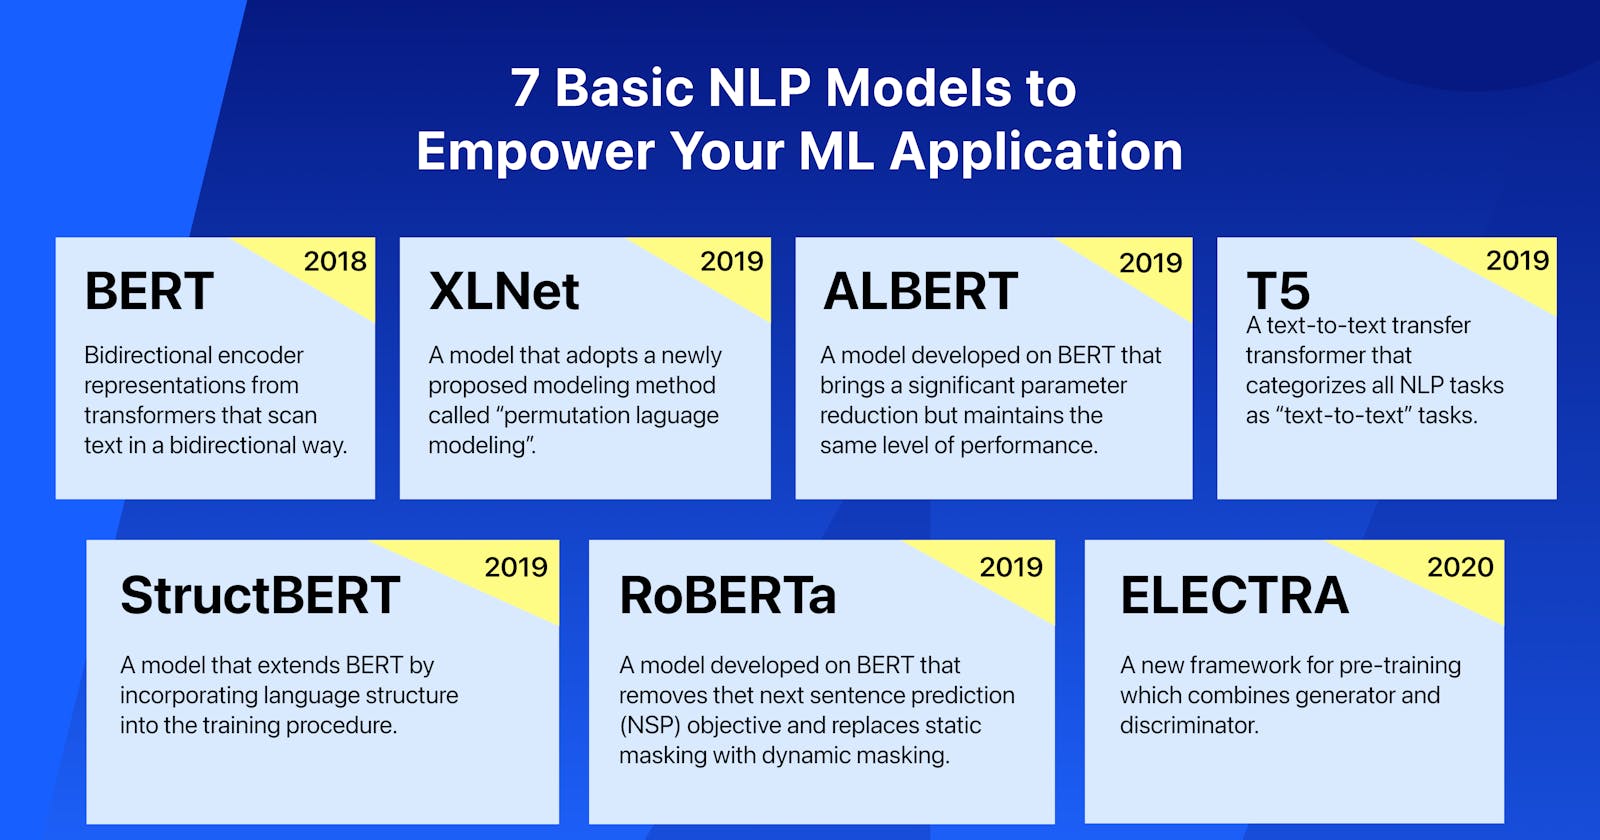 7 Basic NLP Models to Empower Your ML Application